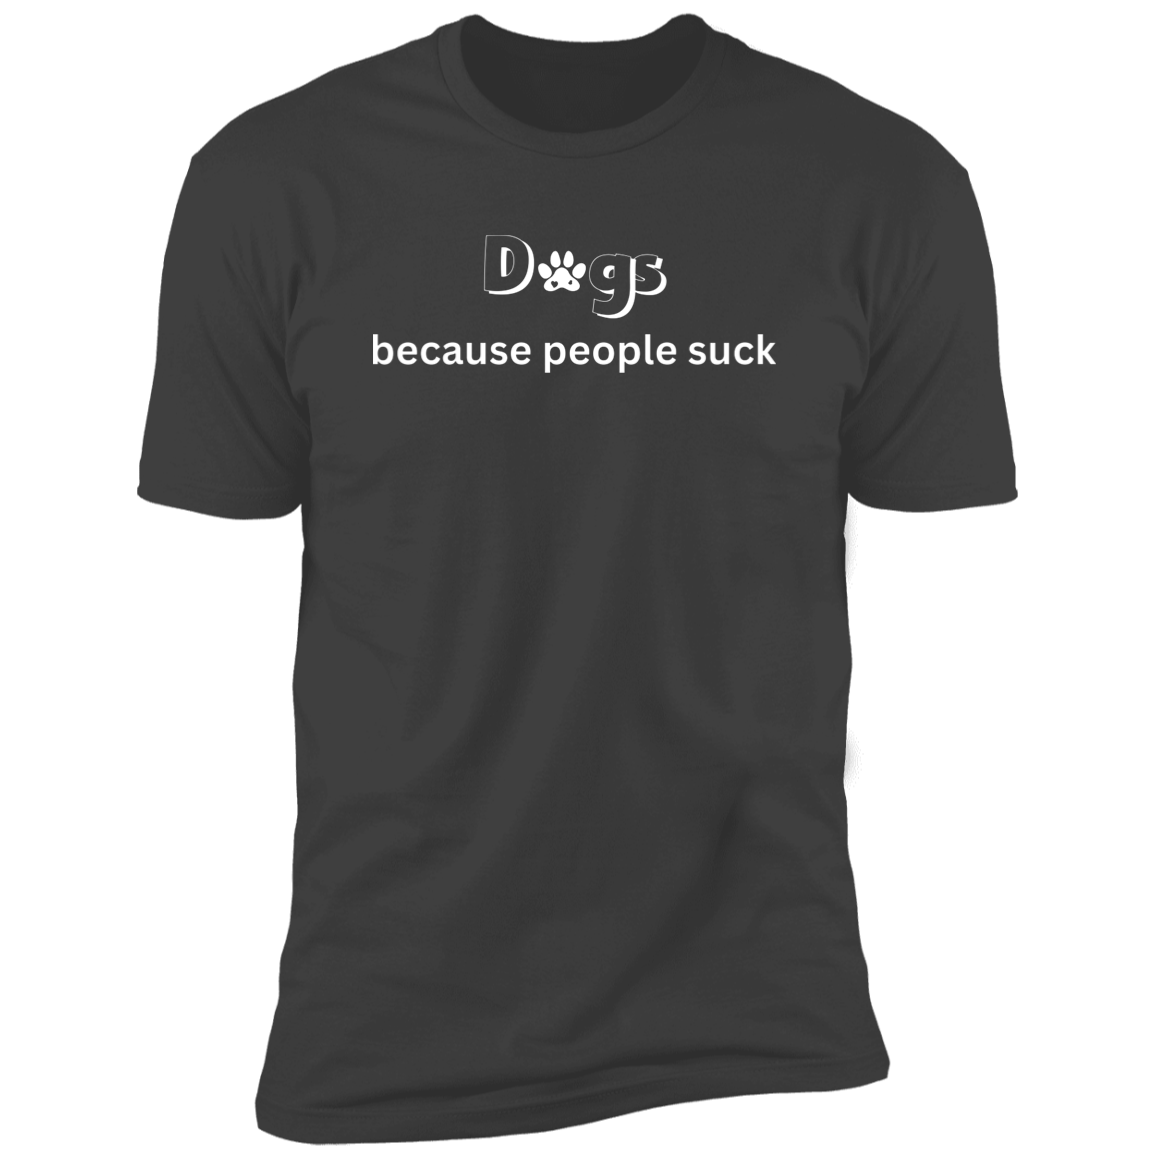 Dogs Because People Such t-shirt, funny dog shirt for humans, in heavy gray